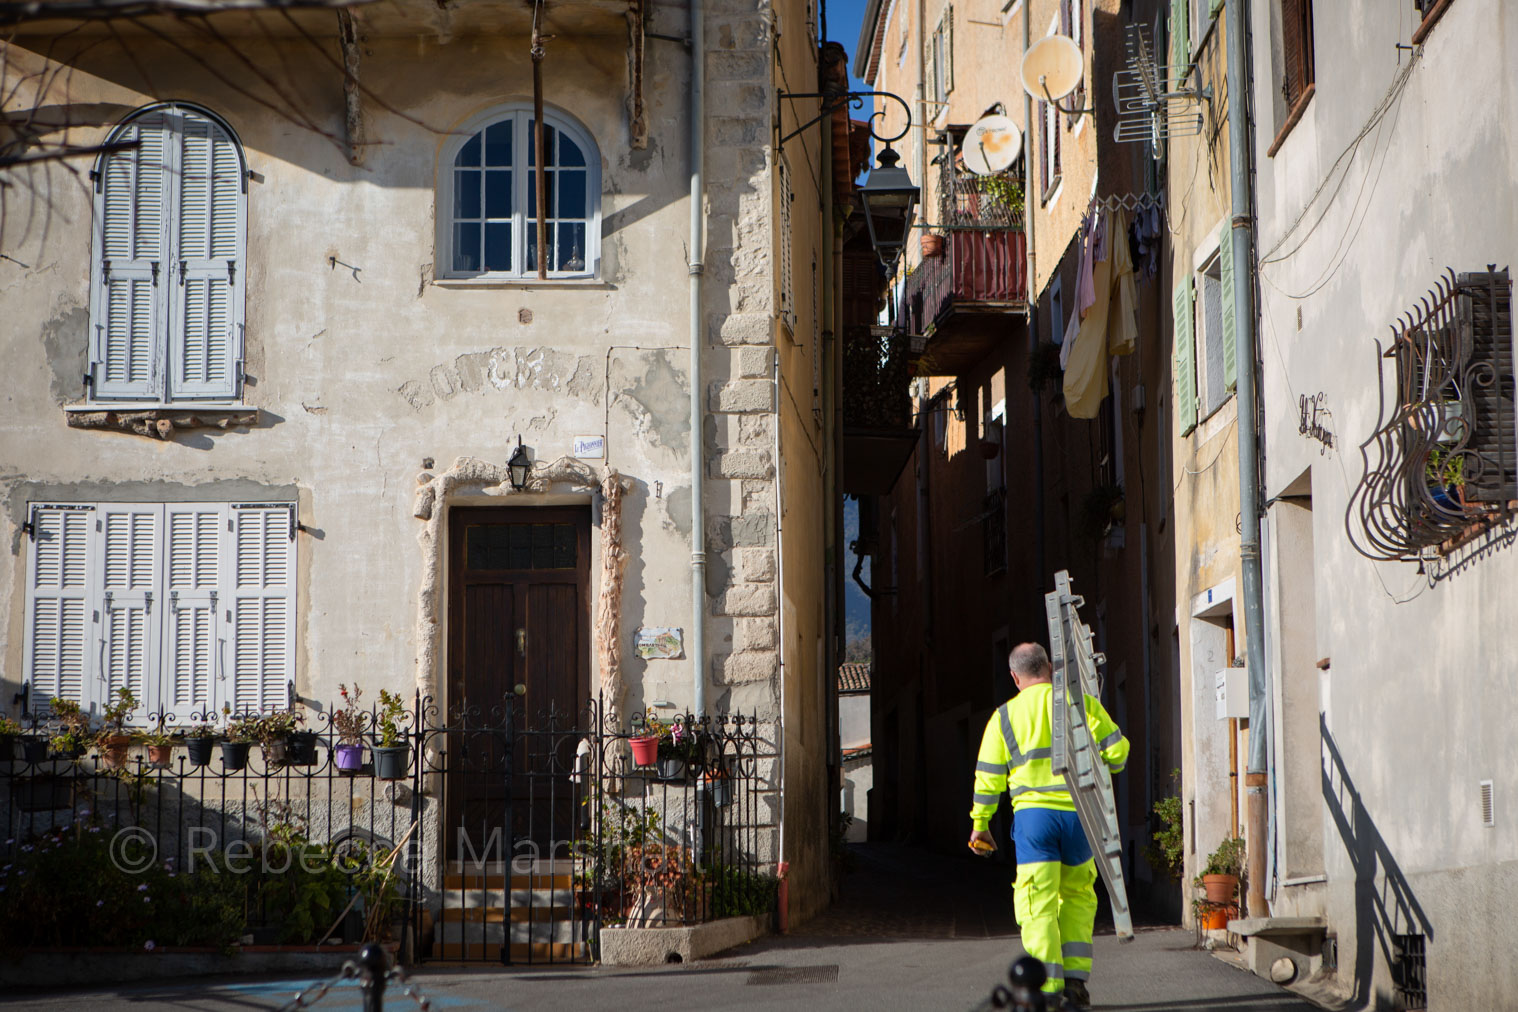 Photograph of a man in fluorescent yellow workwear carrying a ladder along a village alley